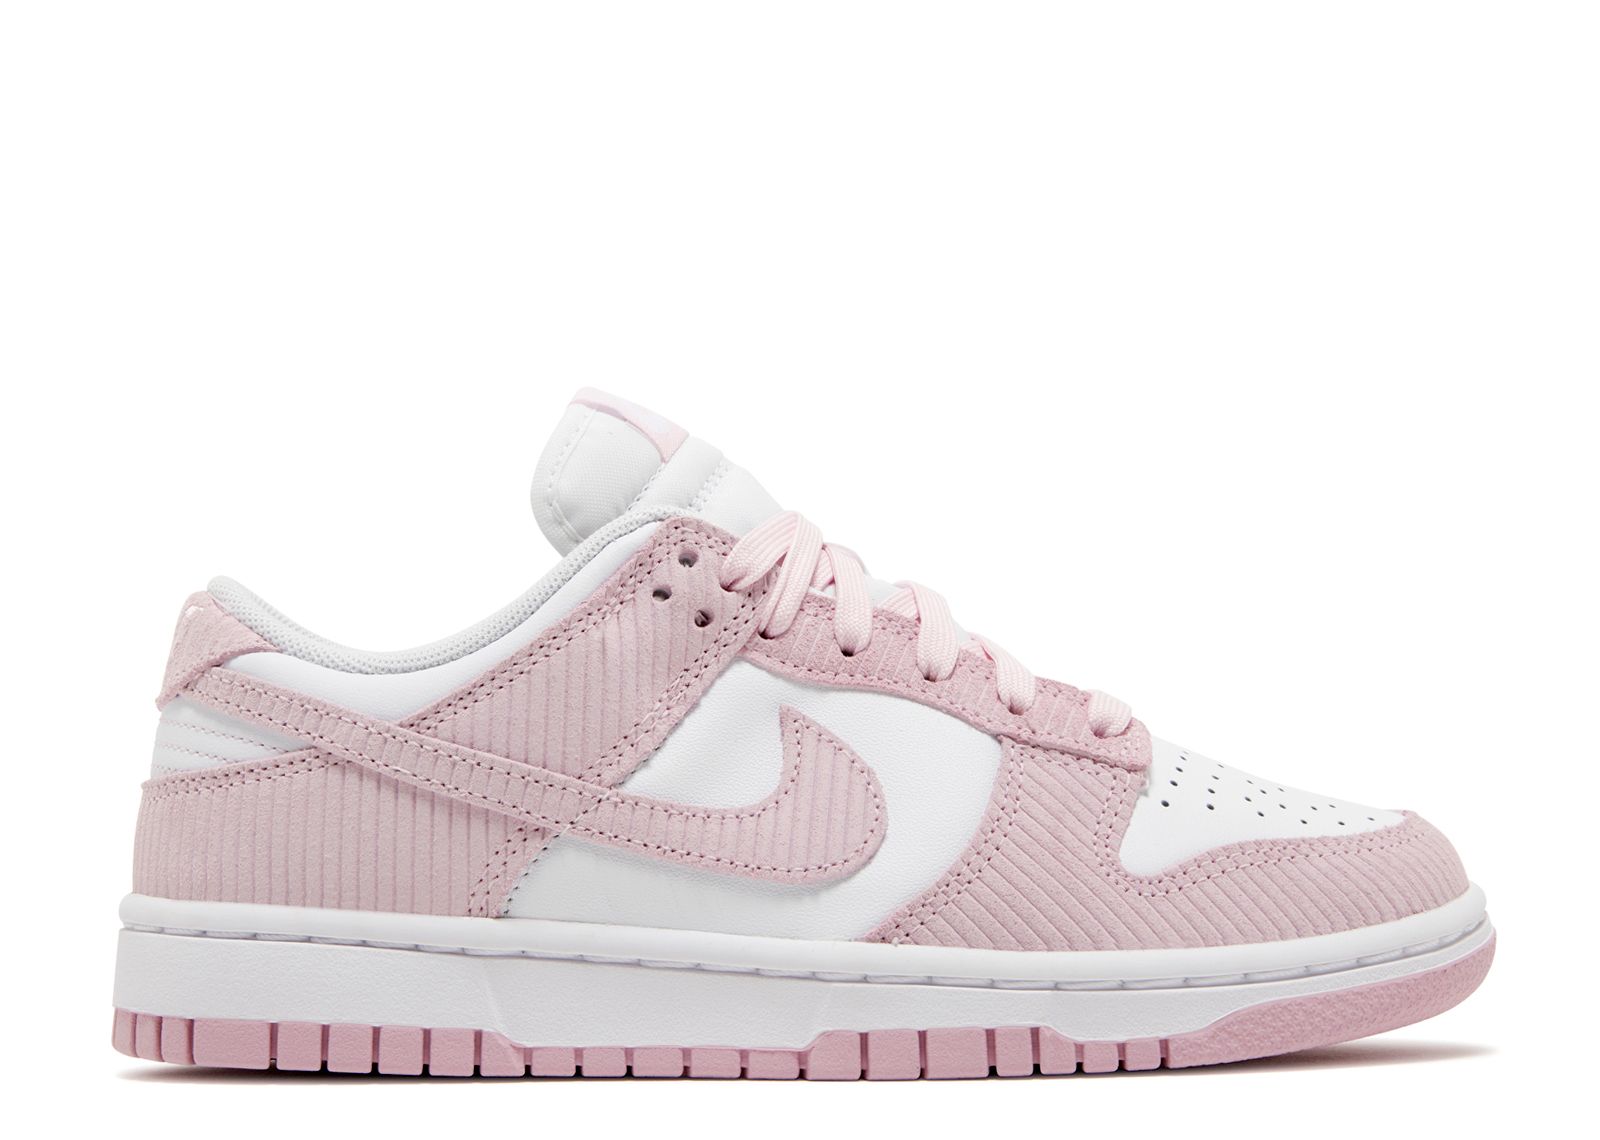 Wmns Dunk Low 'Archeo Pink' - Nike - DD1503 111 - white/archeo